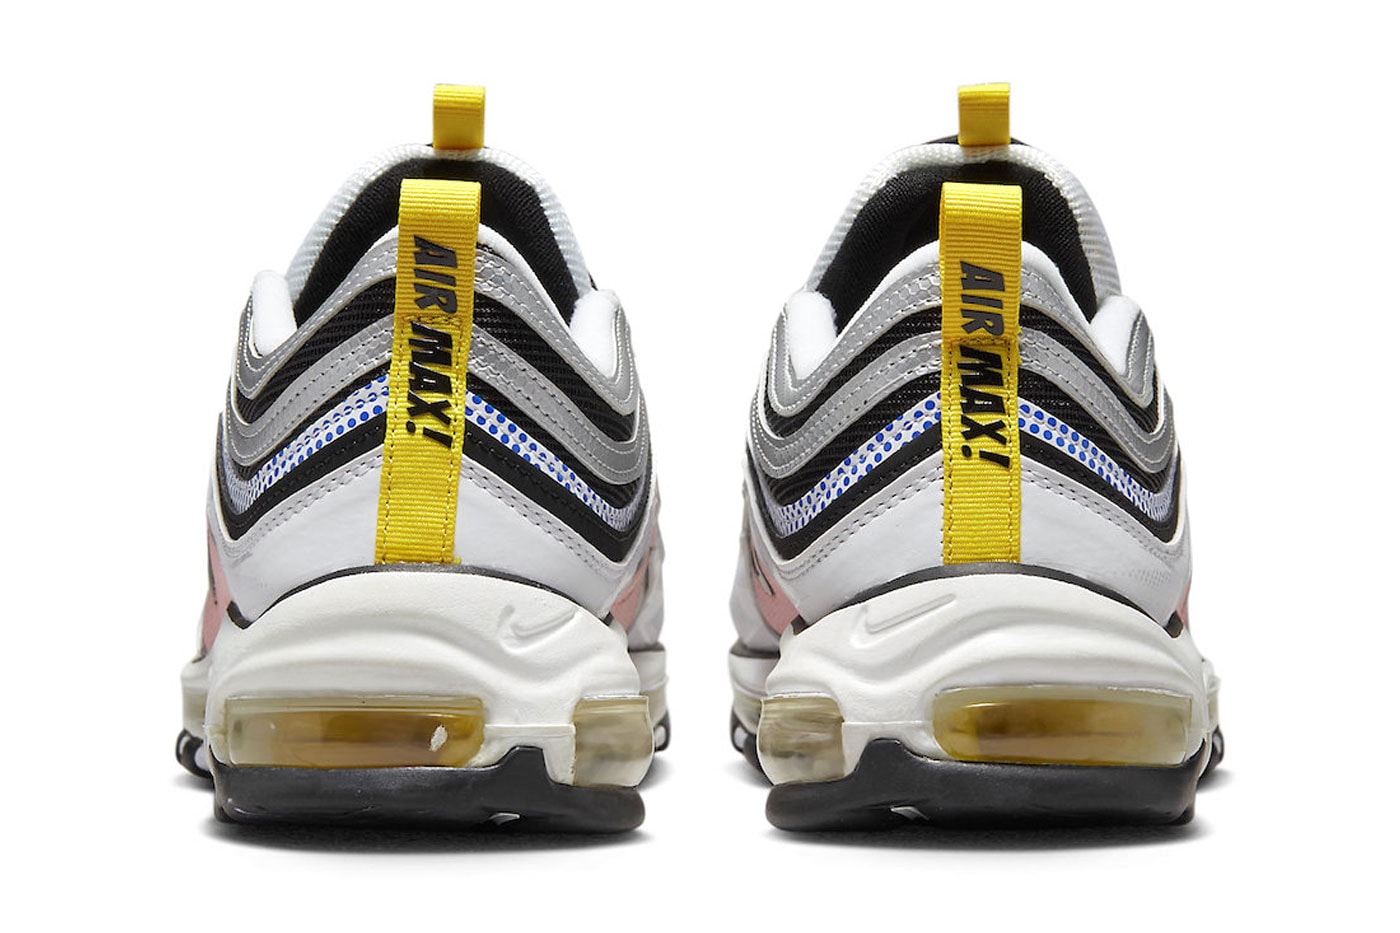 Nike Air Max 97 mighty swooshers DX6057 001 white black blue red july 1 2022 170 usd price date info 